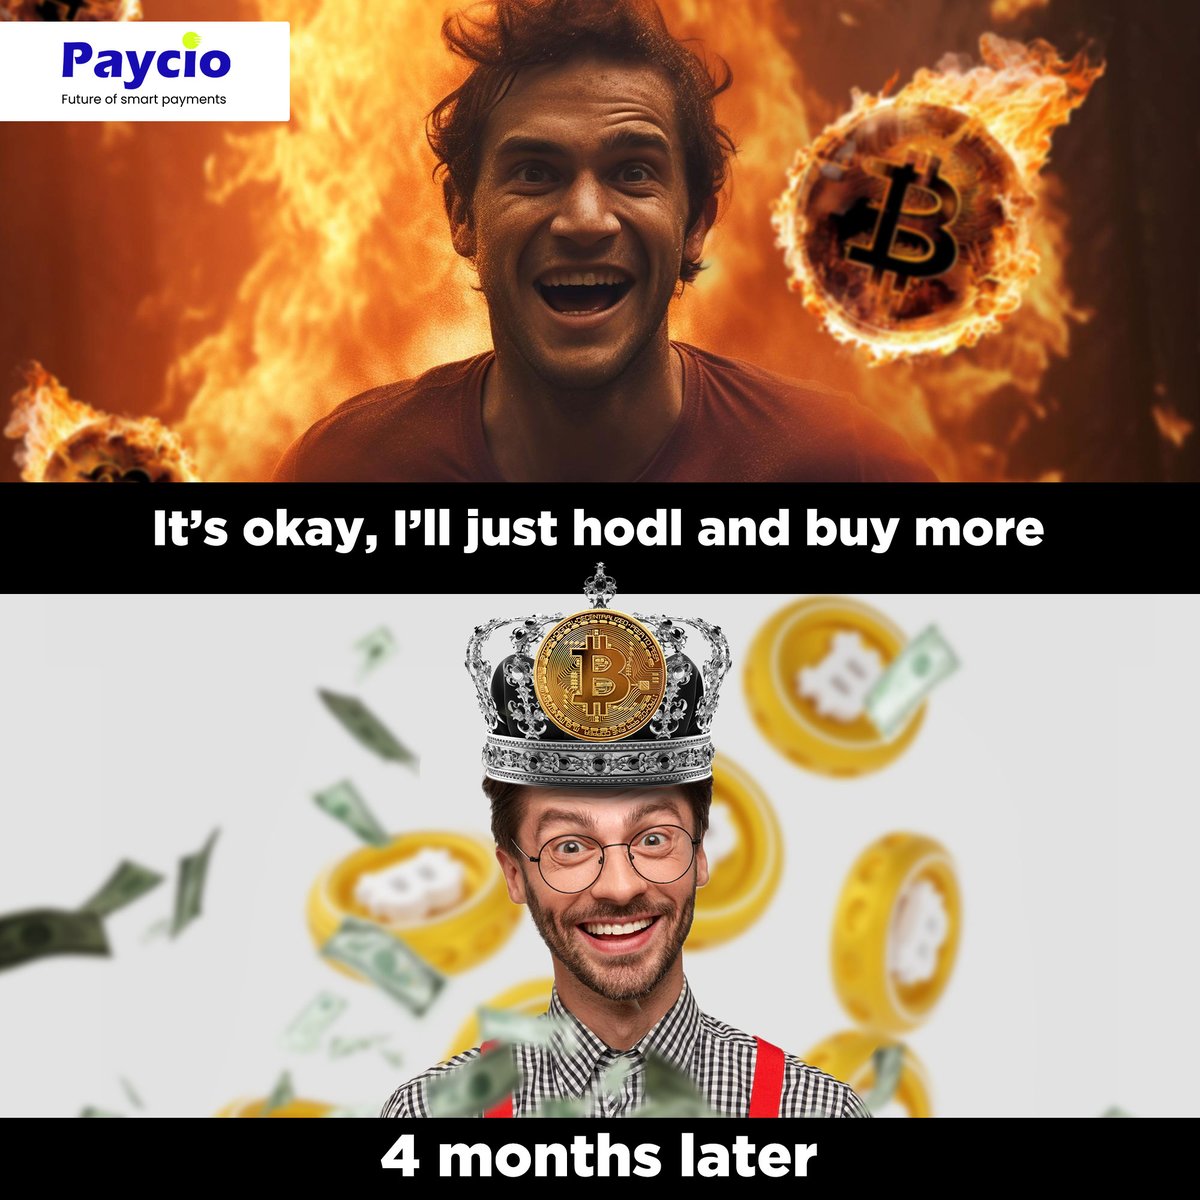 How to win in crypto Don't sell the dip, buy the dip and wait! 😎 Want to know our asset strategy? #cryptopayment #paycio #cryptomeme